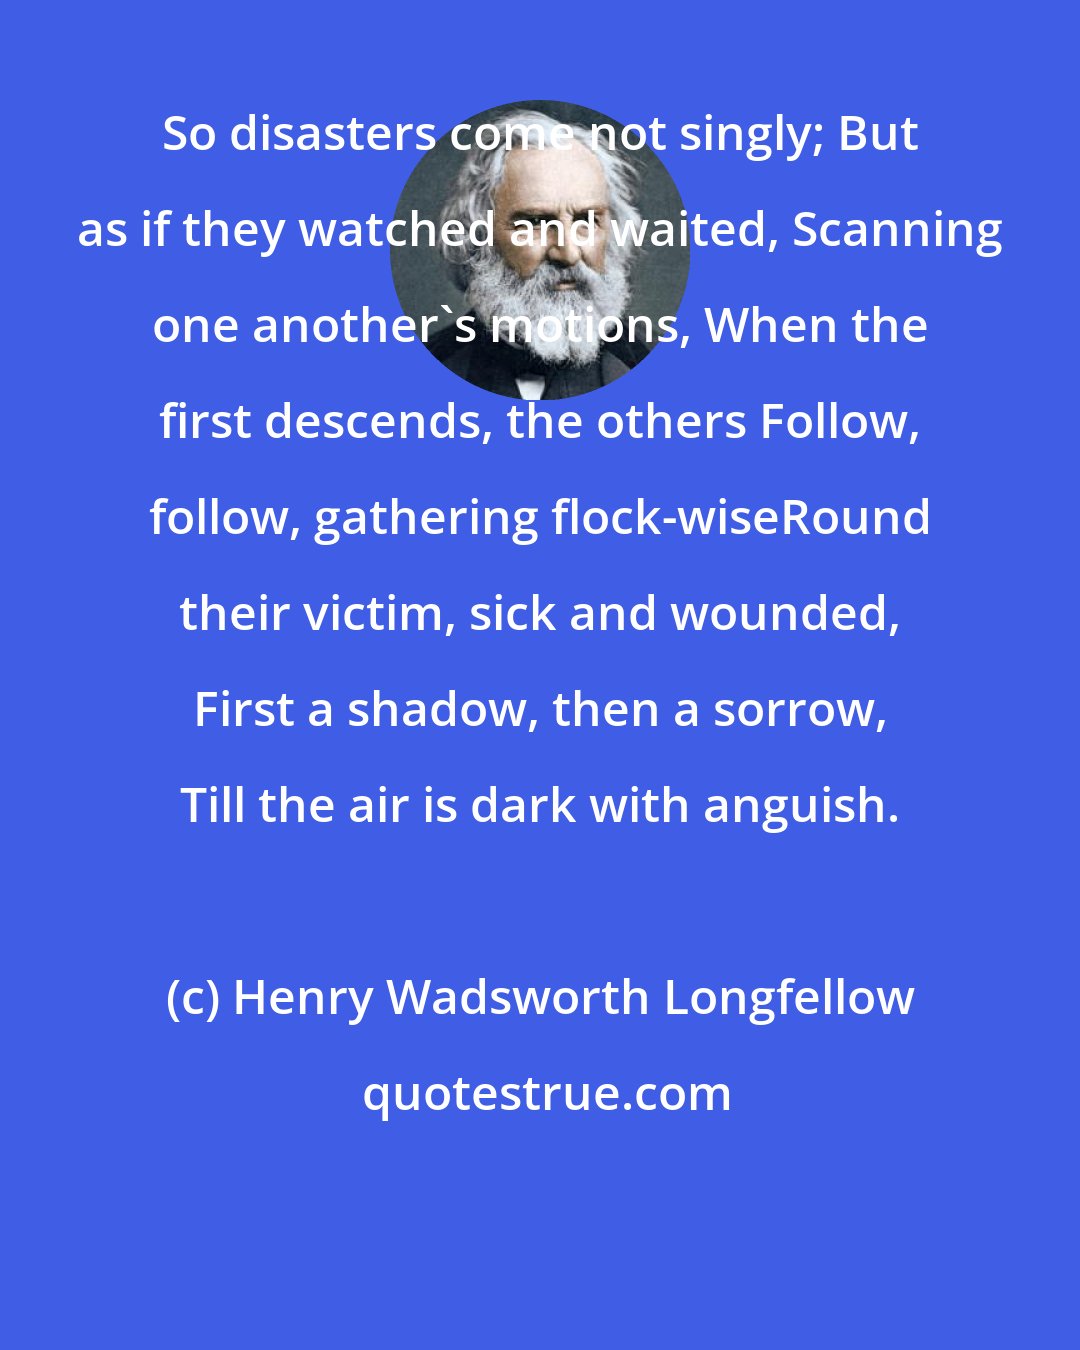 Henry Wadsworth Longfellow: So disasters come not singly; But as if they watched and waited, Scanning one another's motions, When the first descends, the others Follow, follow, gathering flock-wiseRound their victim, sick and wounded, First a shadow, then a sorrow, Till the air is dark with anguish.